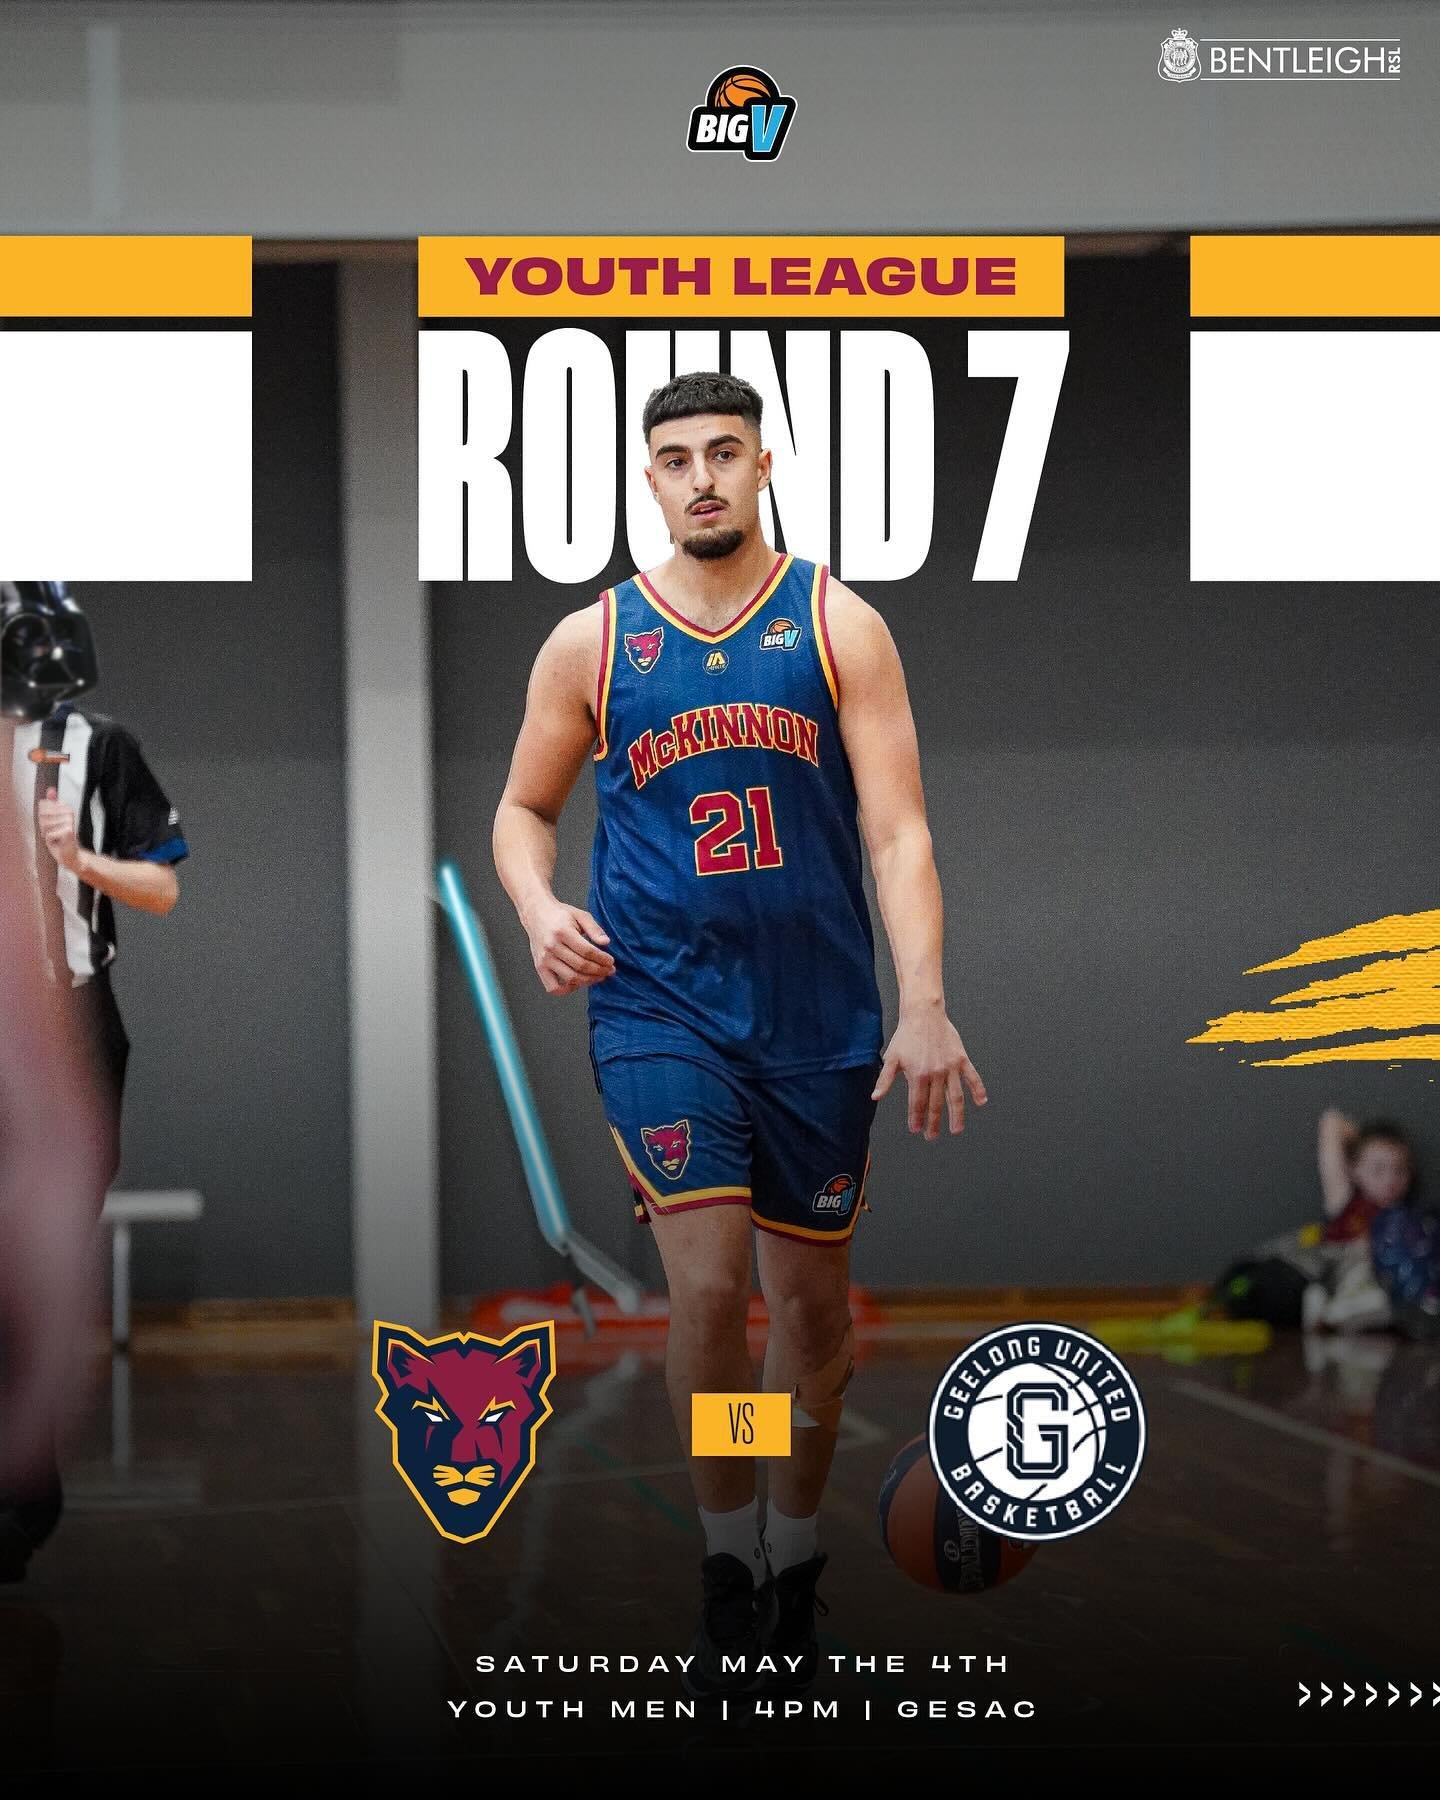 Big V Championship and Youth League⁠
⁠
Join us this Saturday, May the 4th as the Cougars go to War for week 7 of the @bigv_ball season! ⁠
⁠
It all starts at 4pm as our Youth League Men look to stay undefeated as they take on Geelong United
⁠
🆚 Geelo